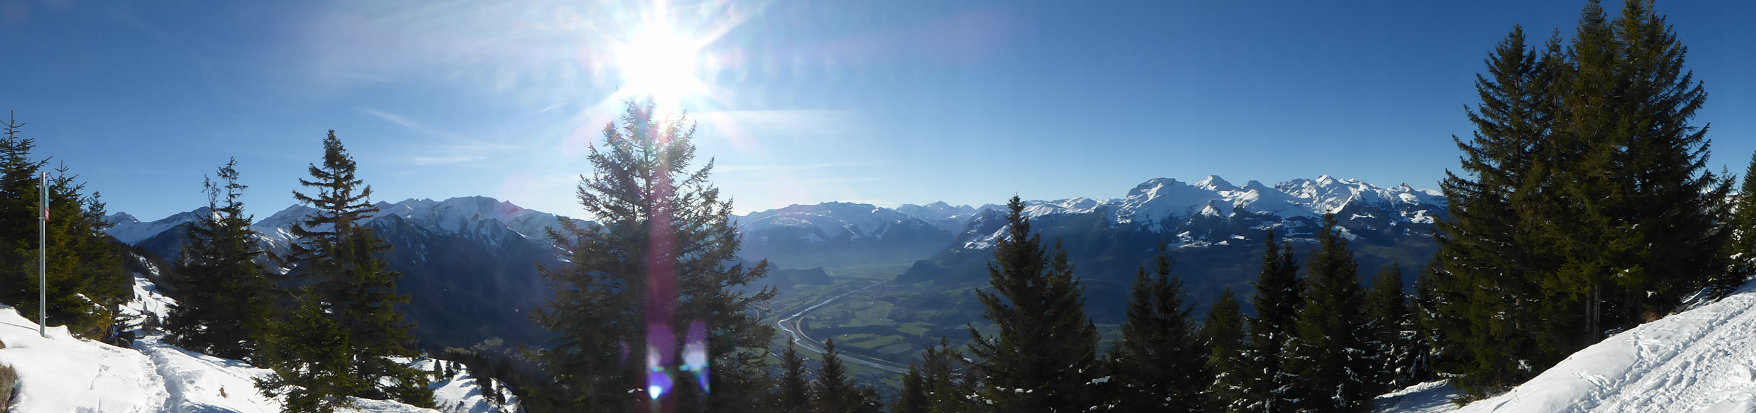 Panorama from Färchaeck into the Rhine Valley